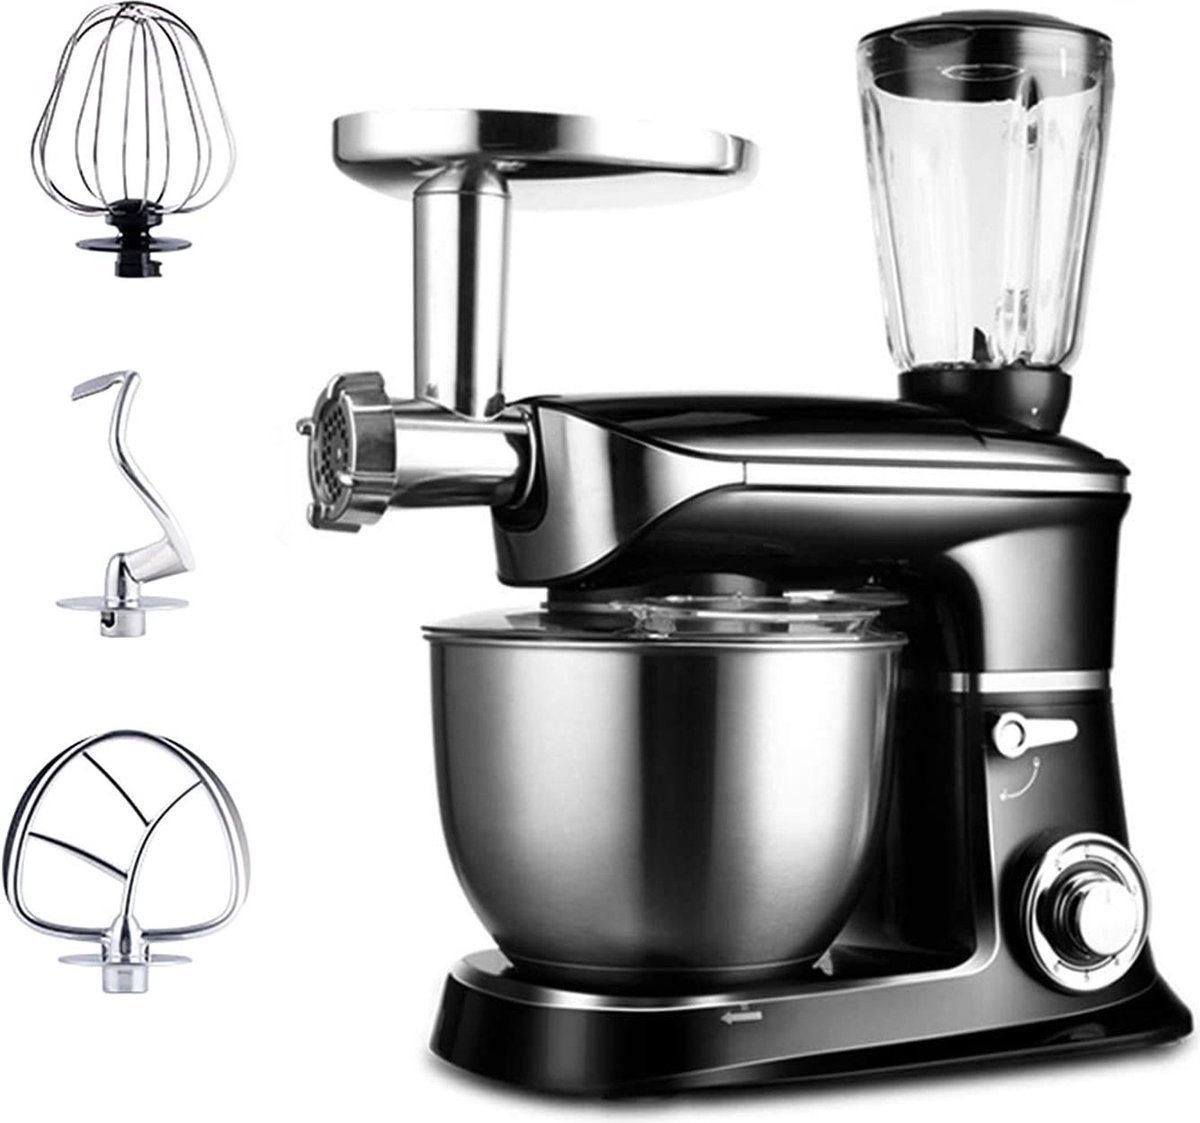 Planetary Mixer With Blender, Meat Grinder, Whisk, Dough Hook, Mixing Hook - 1900W - 6.5 Liters - Black - Royalty Line